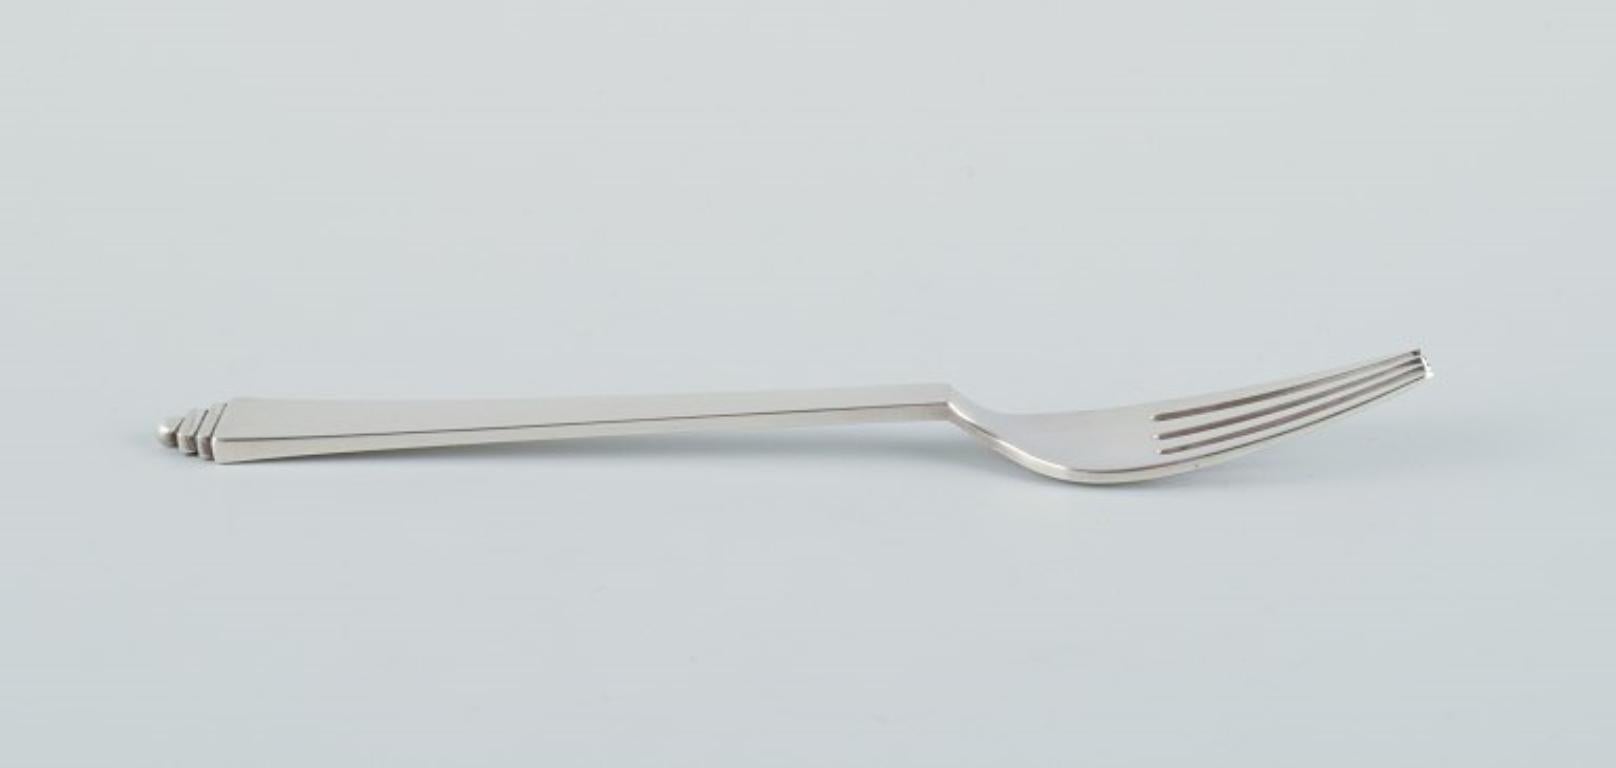 Georg Jensen Pyramid dinner fork in sterling silver.
Stamped with 1933-1944 hallmark.
In perfect condition. Appears as new.
Dimensions: Length 19.0 cm.